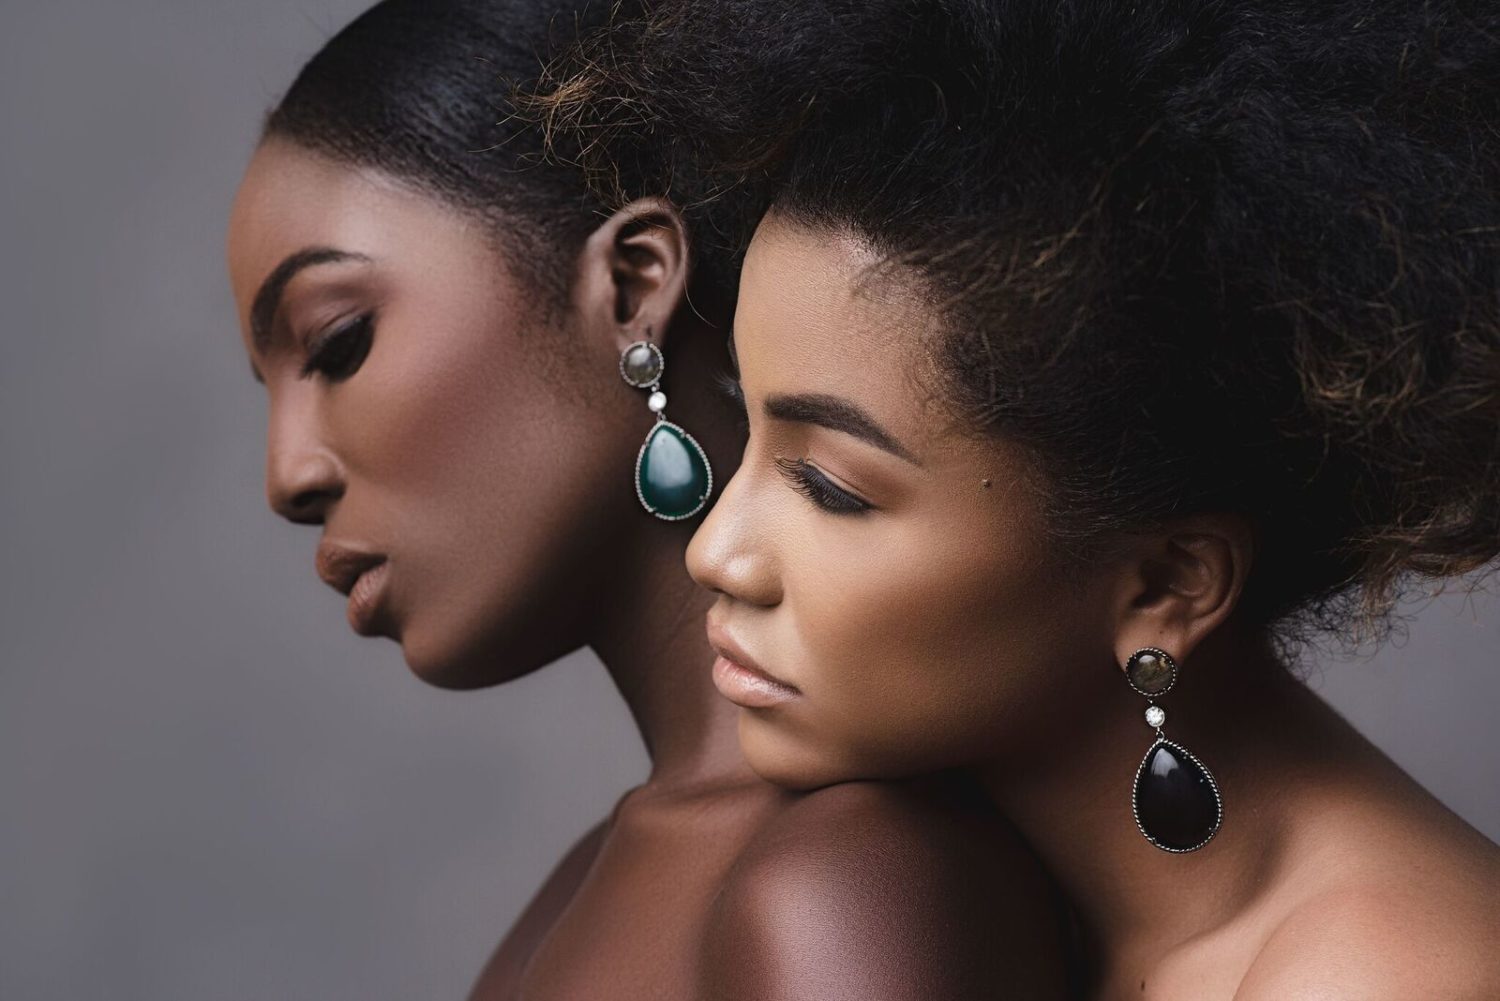 Are You A Lover Of Jewellery? FFF Jewellery Just Released Their Collection And It's Fire!